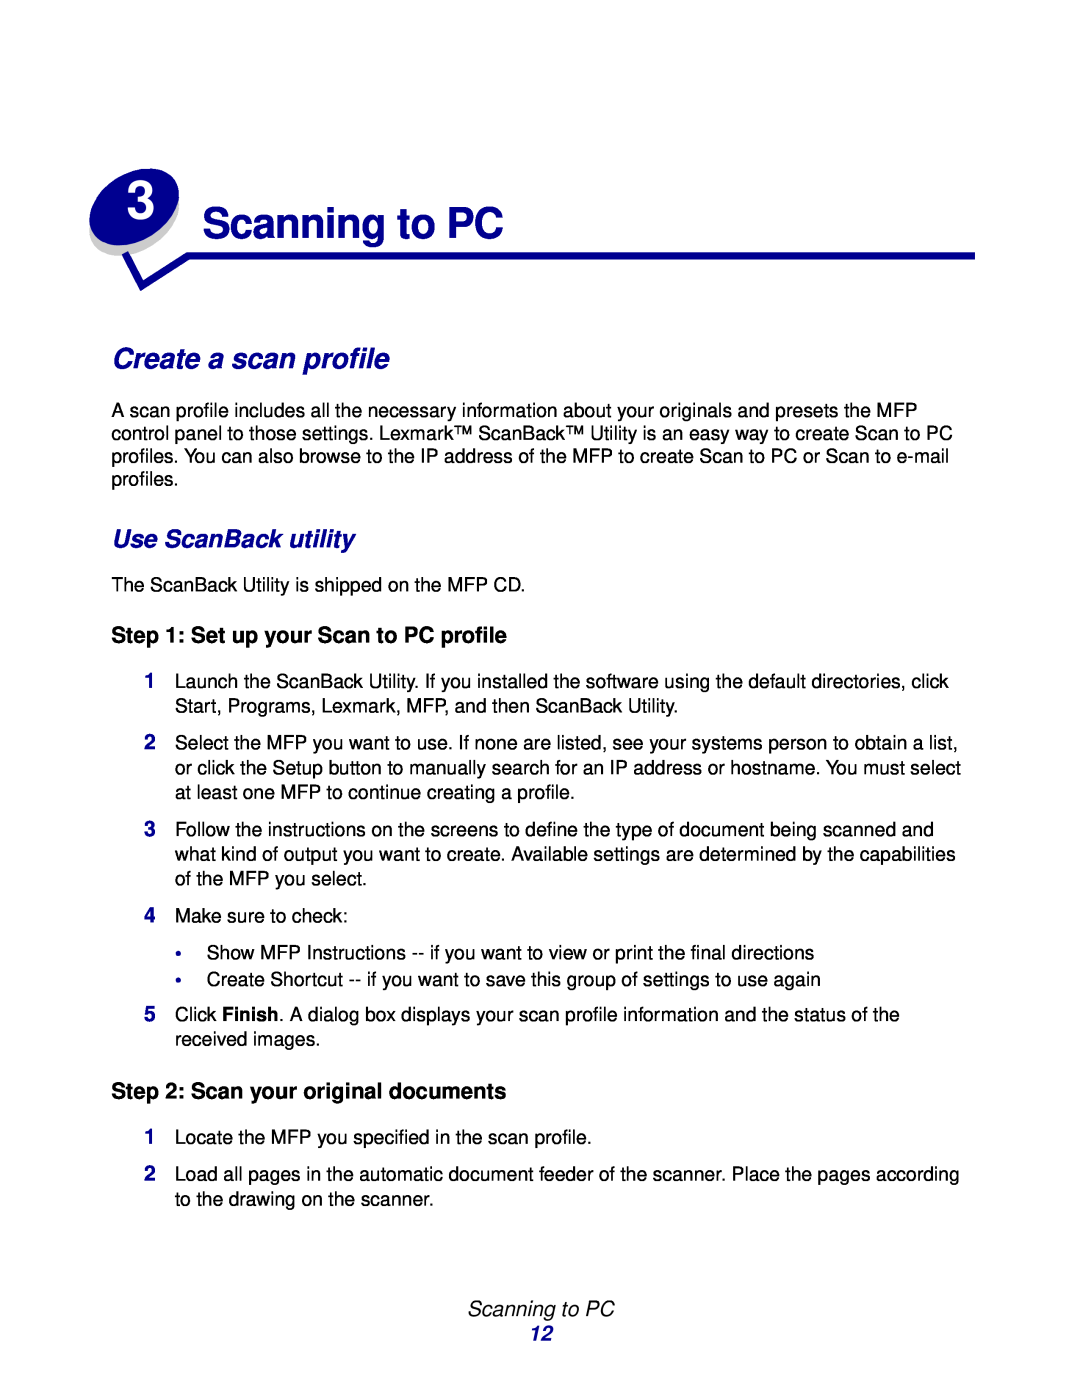 Lexmark 3200 manual Scanning to PC, Create a scan profile, Use ScanBack utility, Set up your Scan to PC profile 